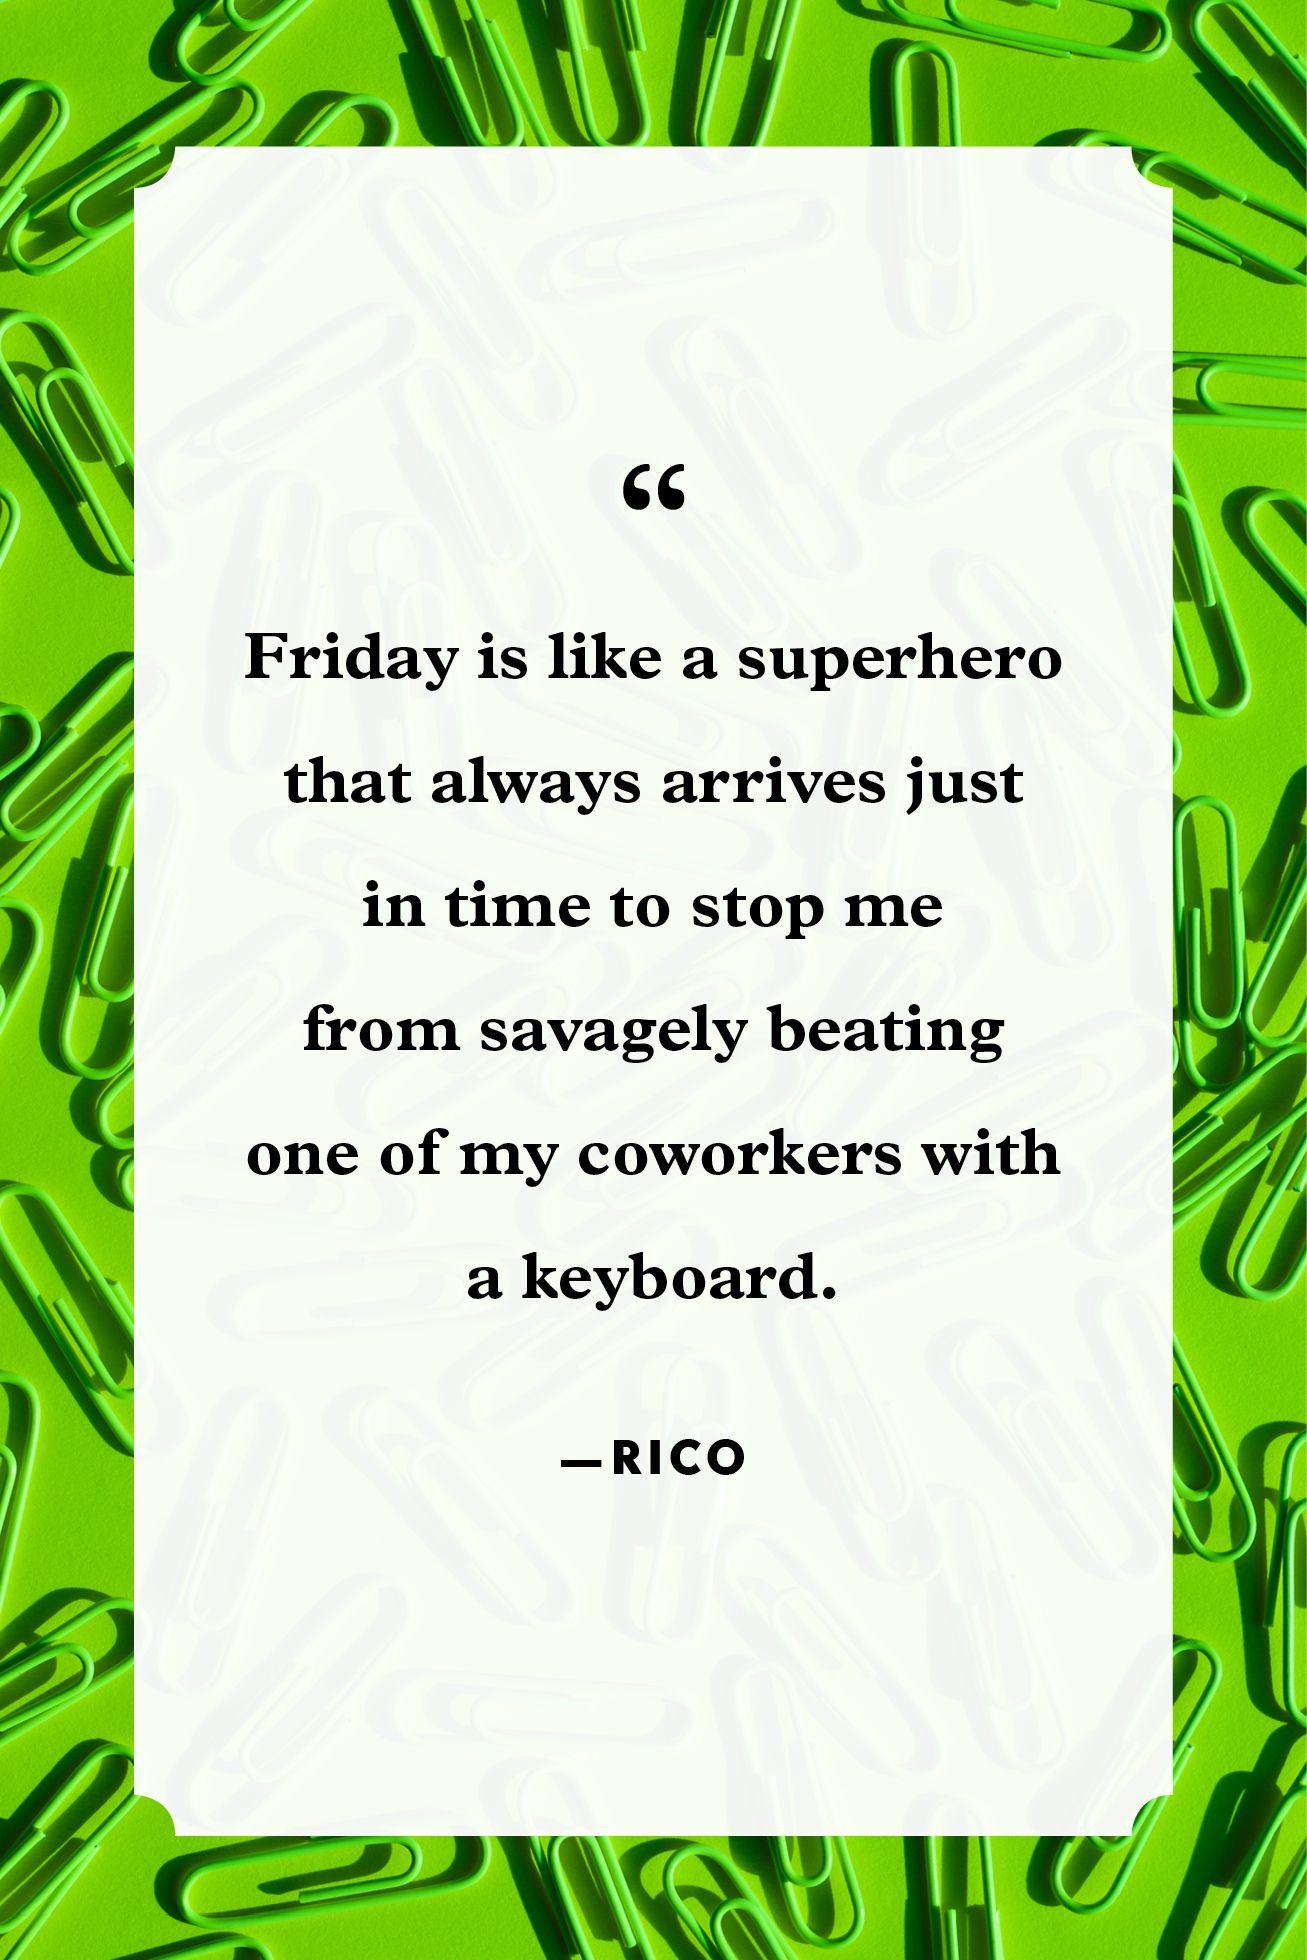 Friday is like a superhero that always arrives just in time to stop me from savagely beating one of my coworkers with a keyboard. – Rico.